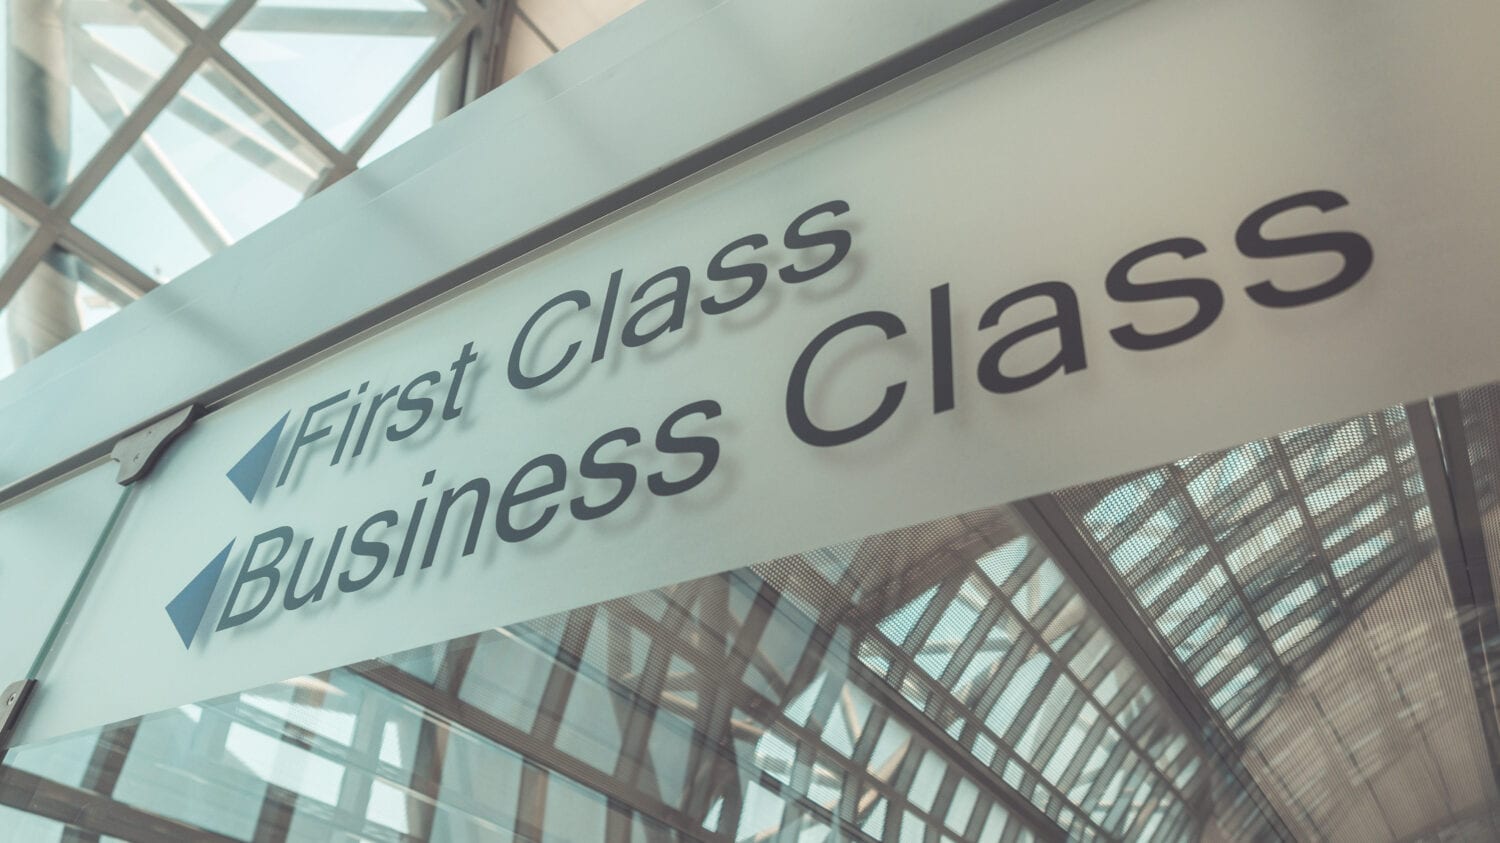 First Class and Business Class sign at the airport. (Vintage Style)